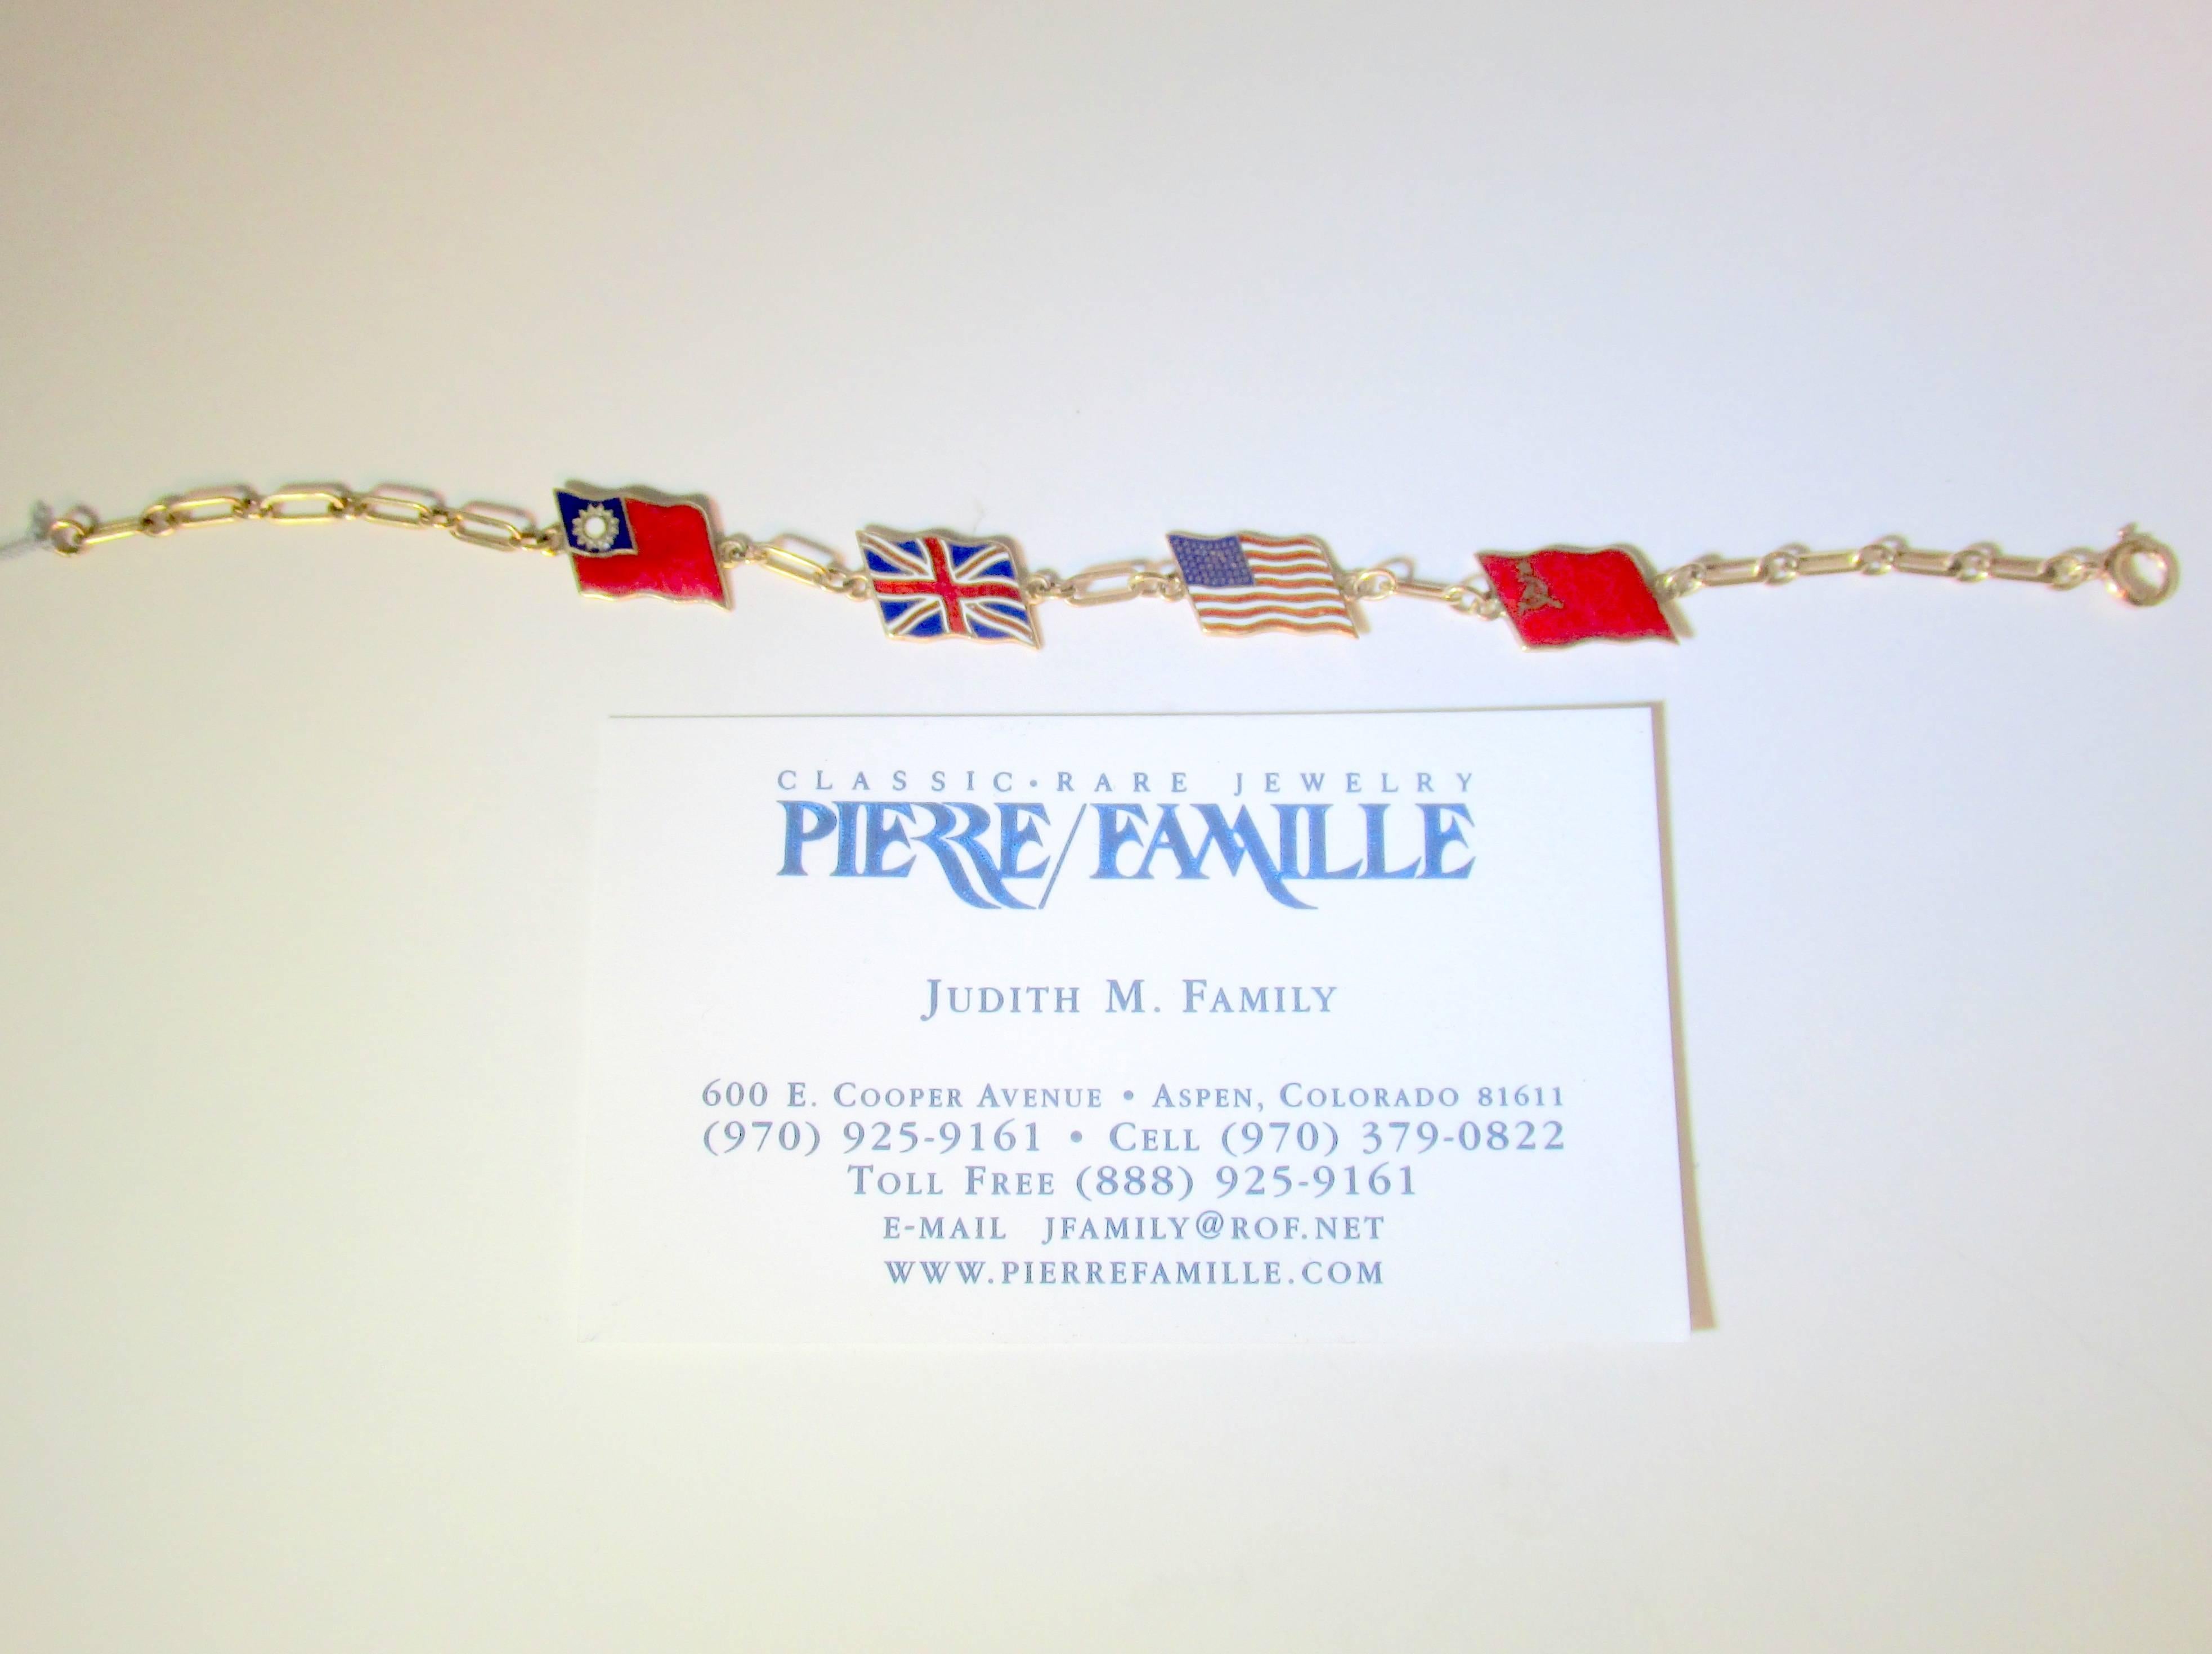 Set in 14k, there are 4 enameled flags representing United States, Russia, United Kingdom and Republic of China - allies in the Second World War.